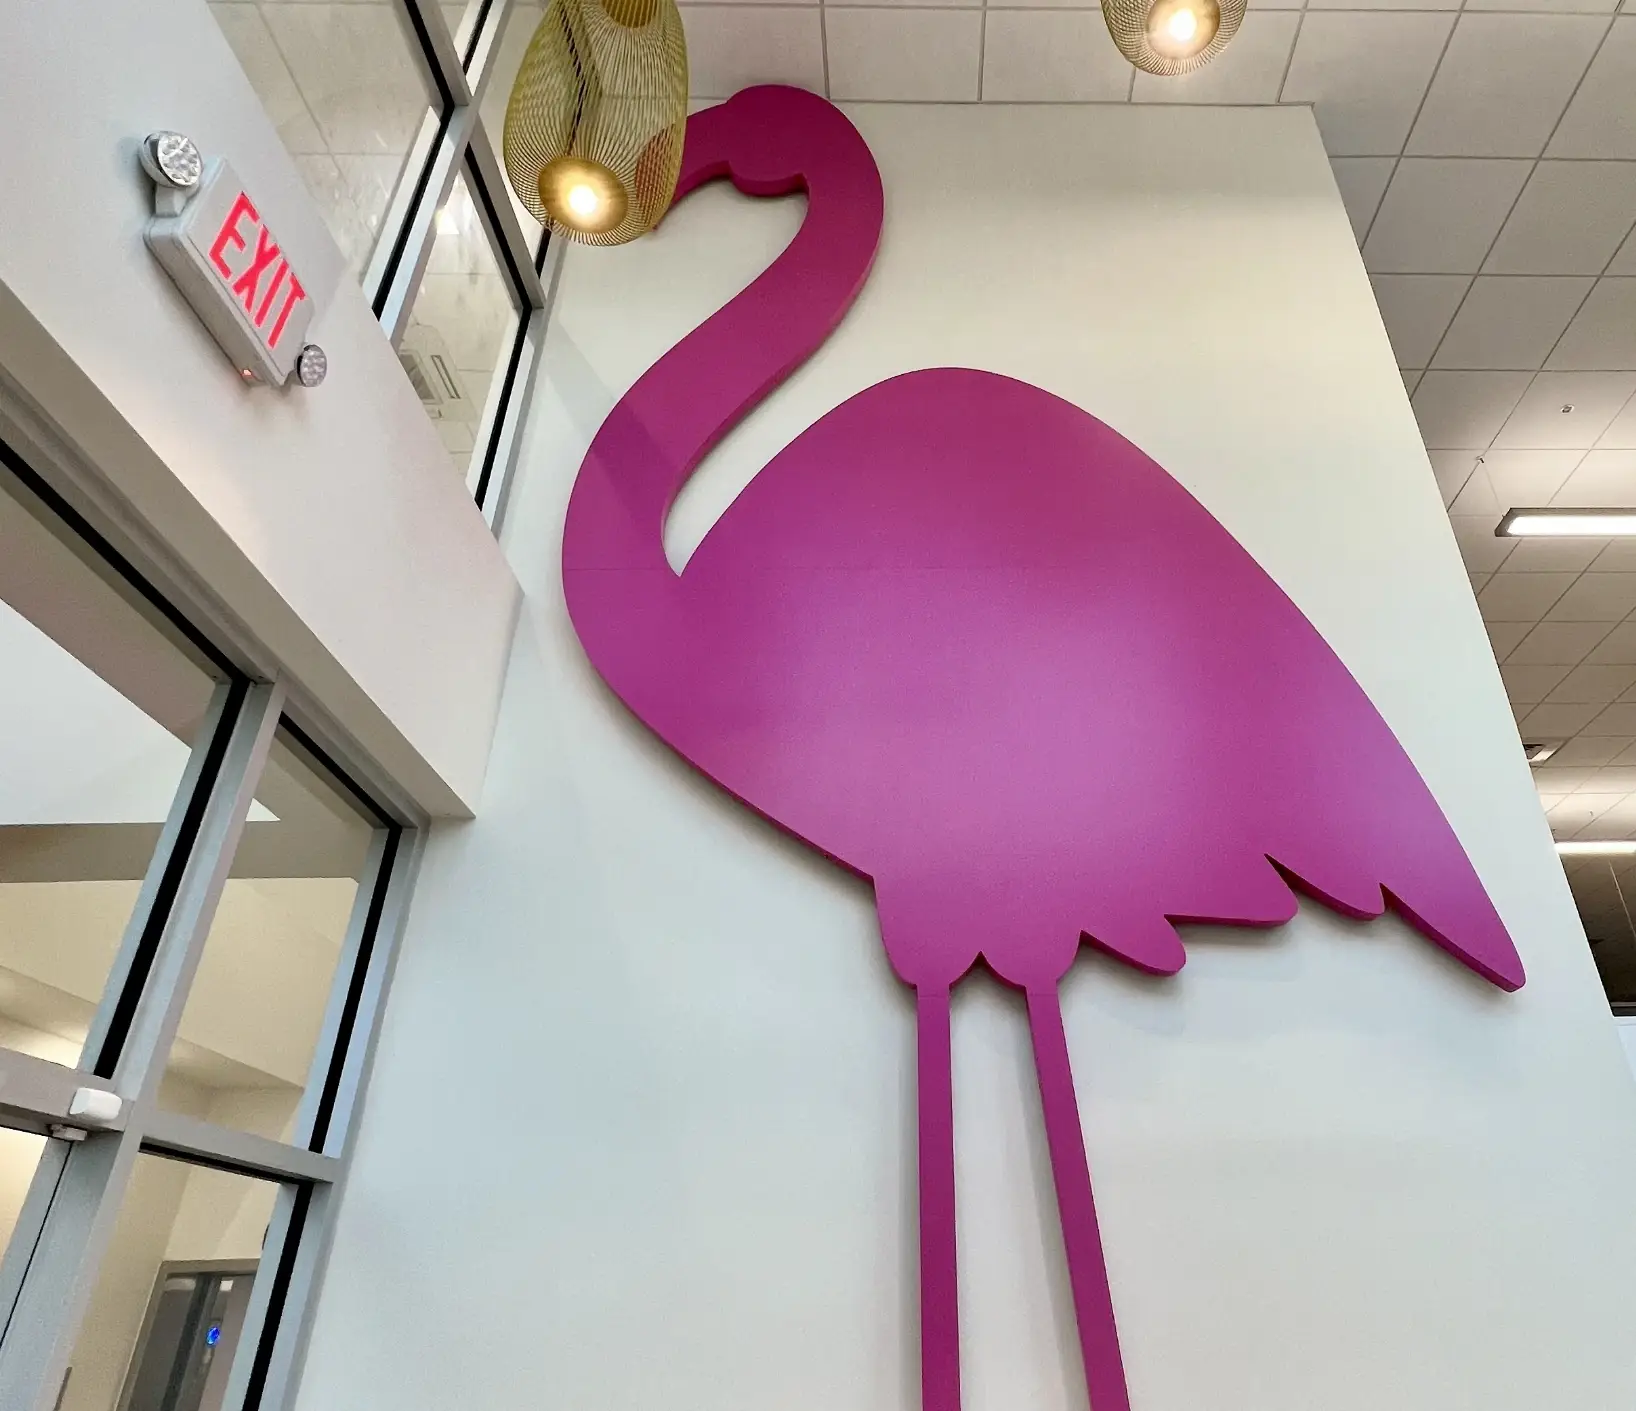 A pink flamingo on the wall of a building.